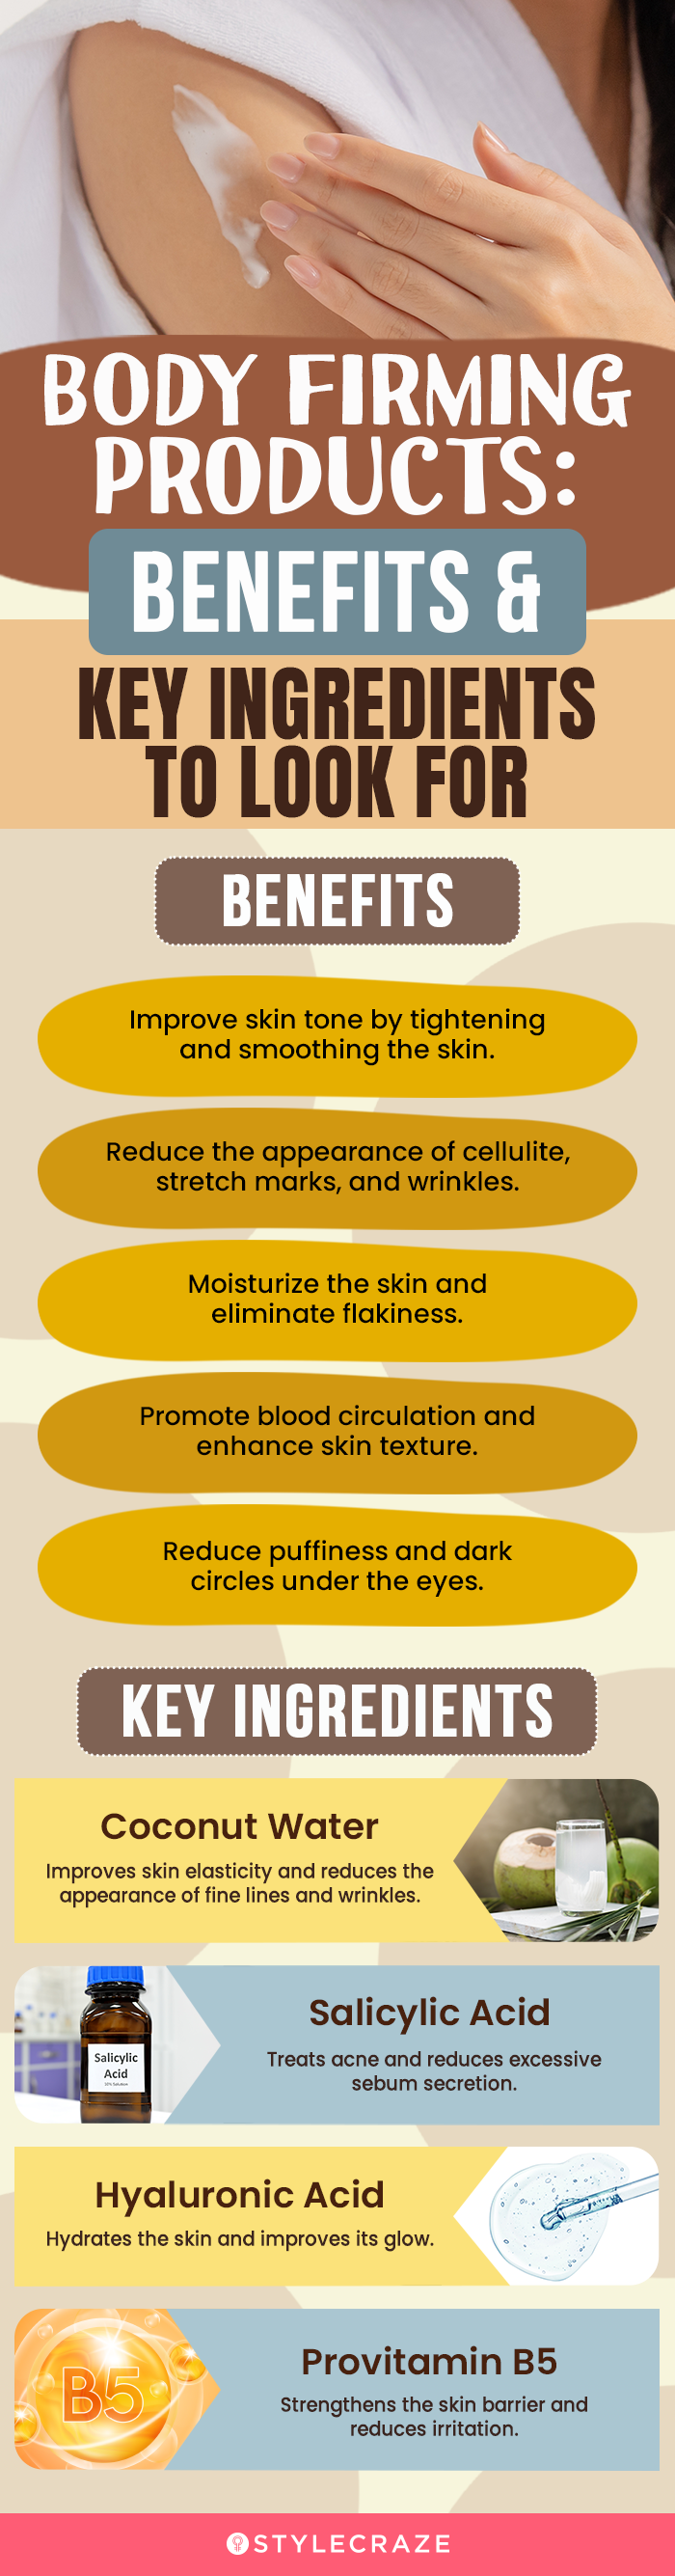 Key Ingredients & Benefits Of Body Firming Products (infographic)